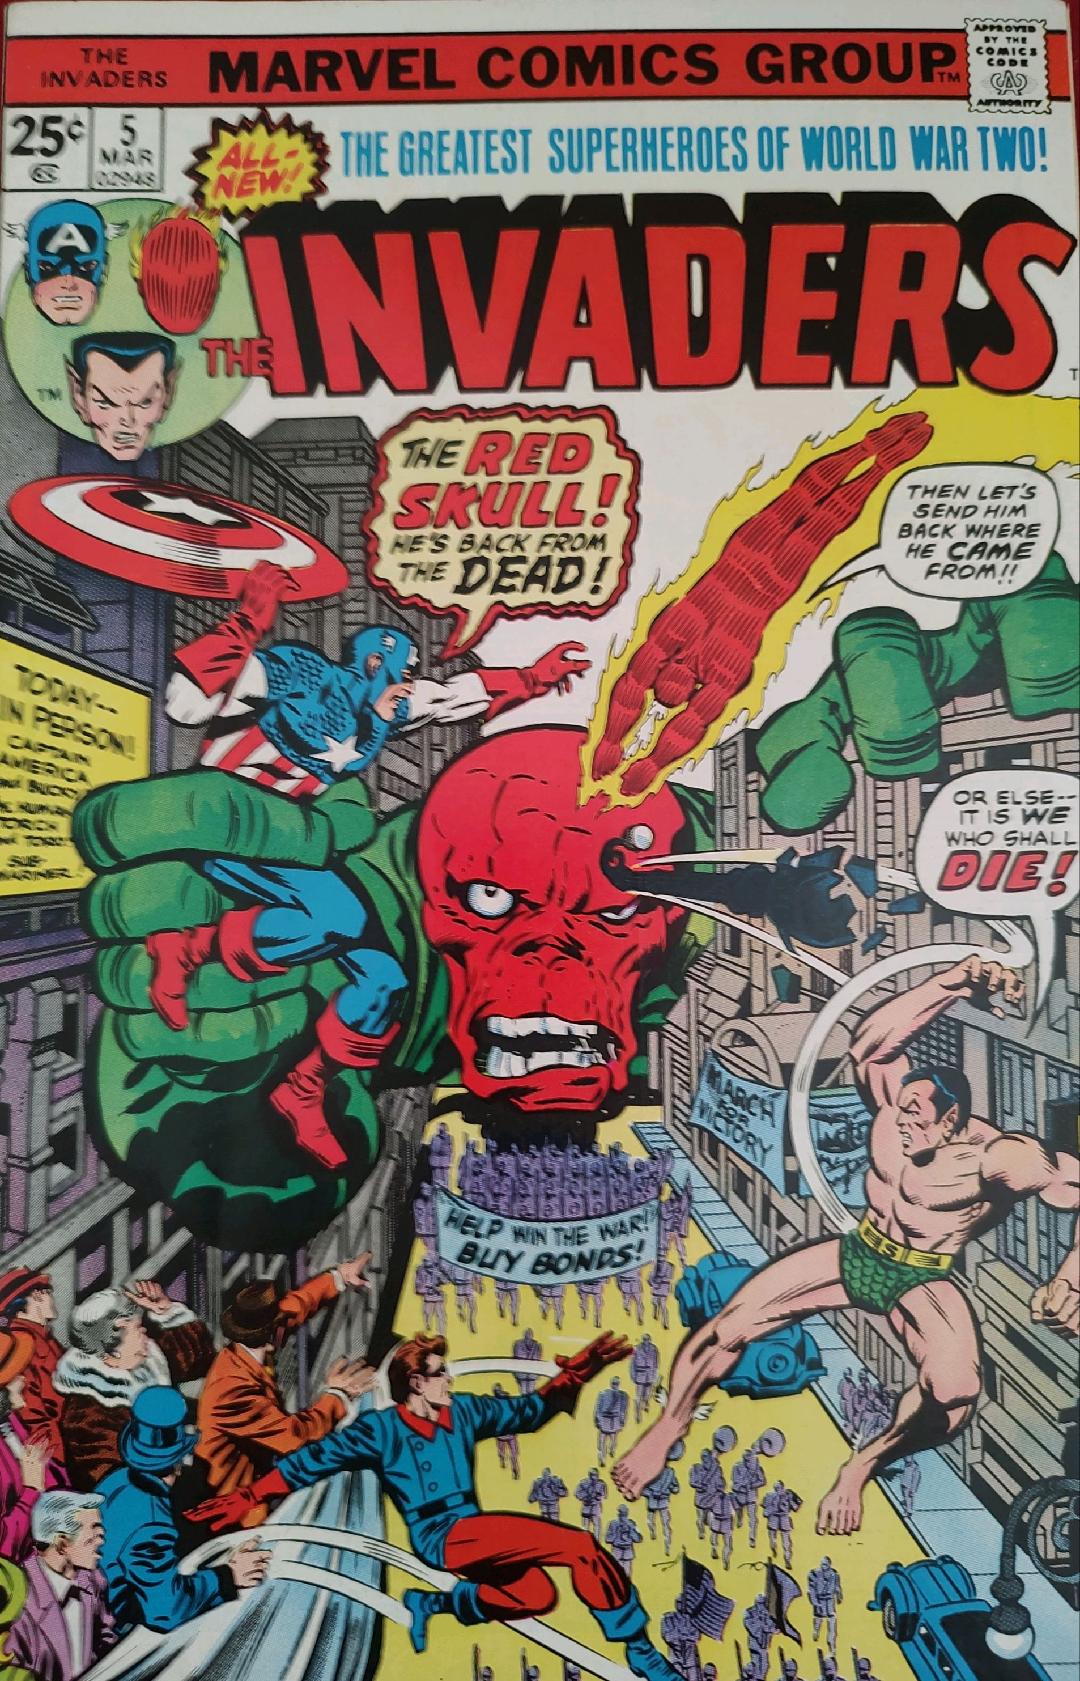 The Invaders #5 Comic Book Cover